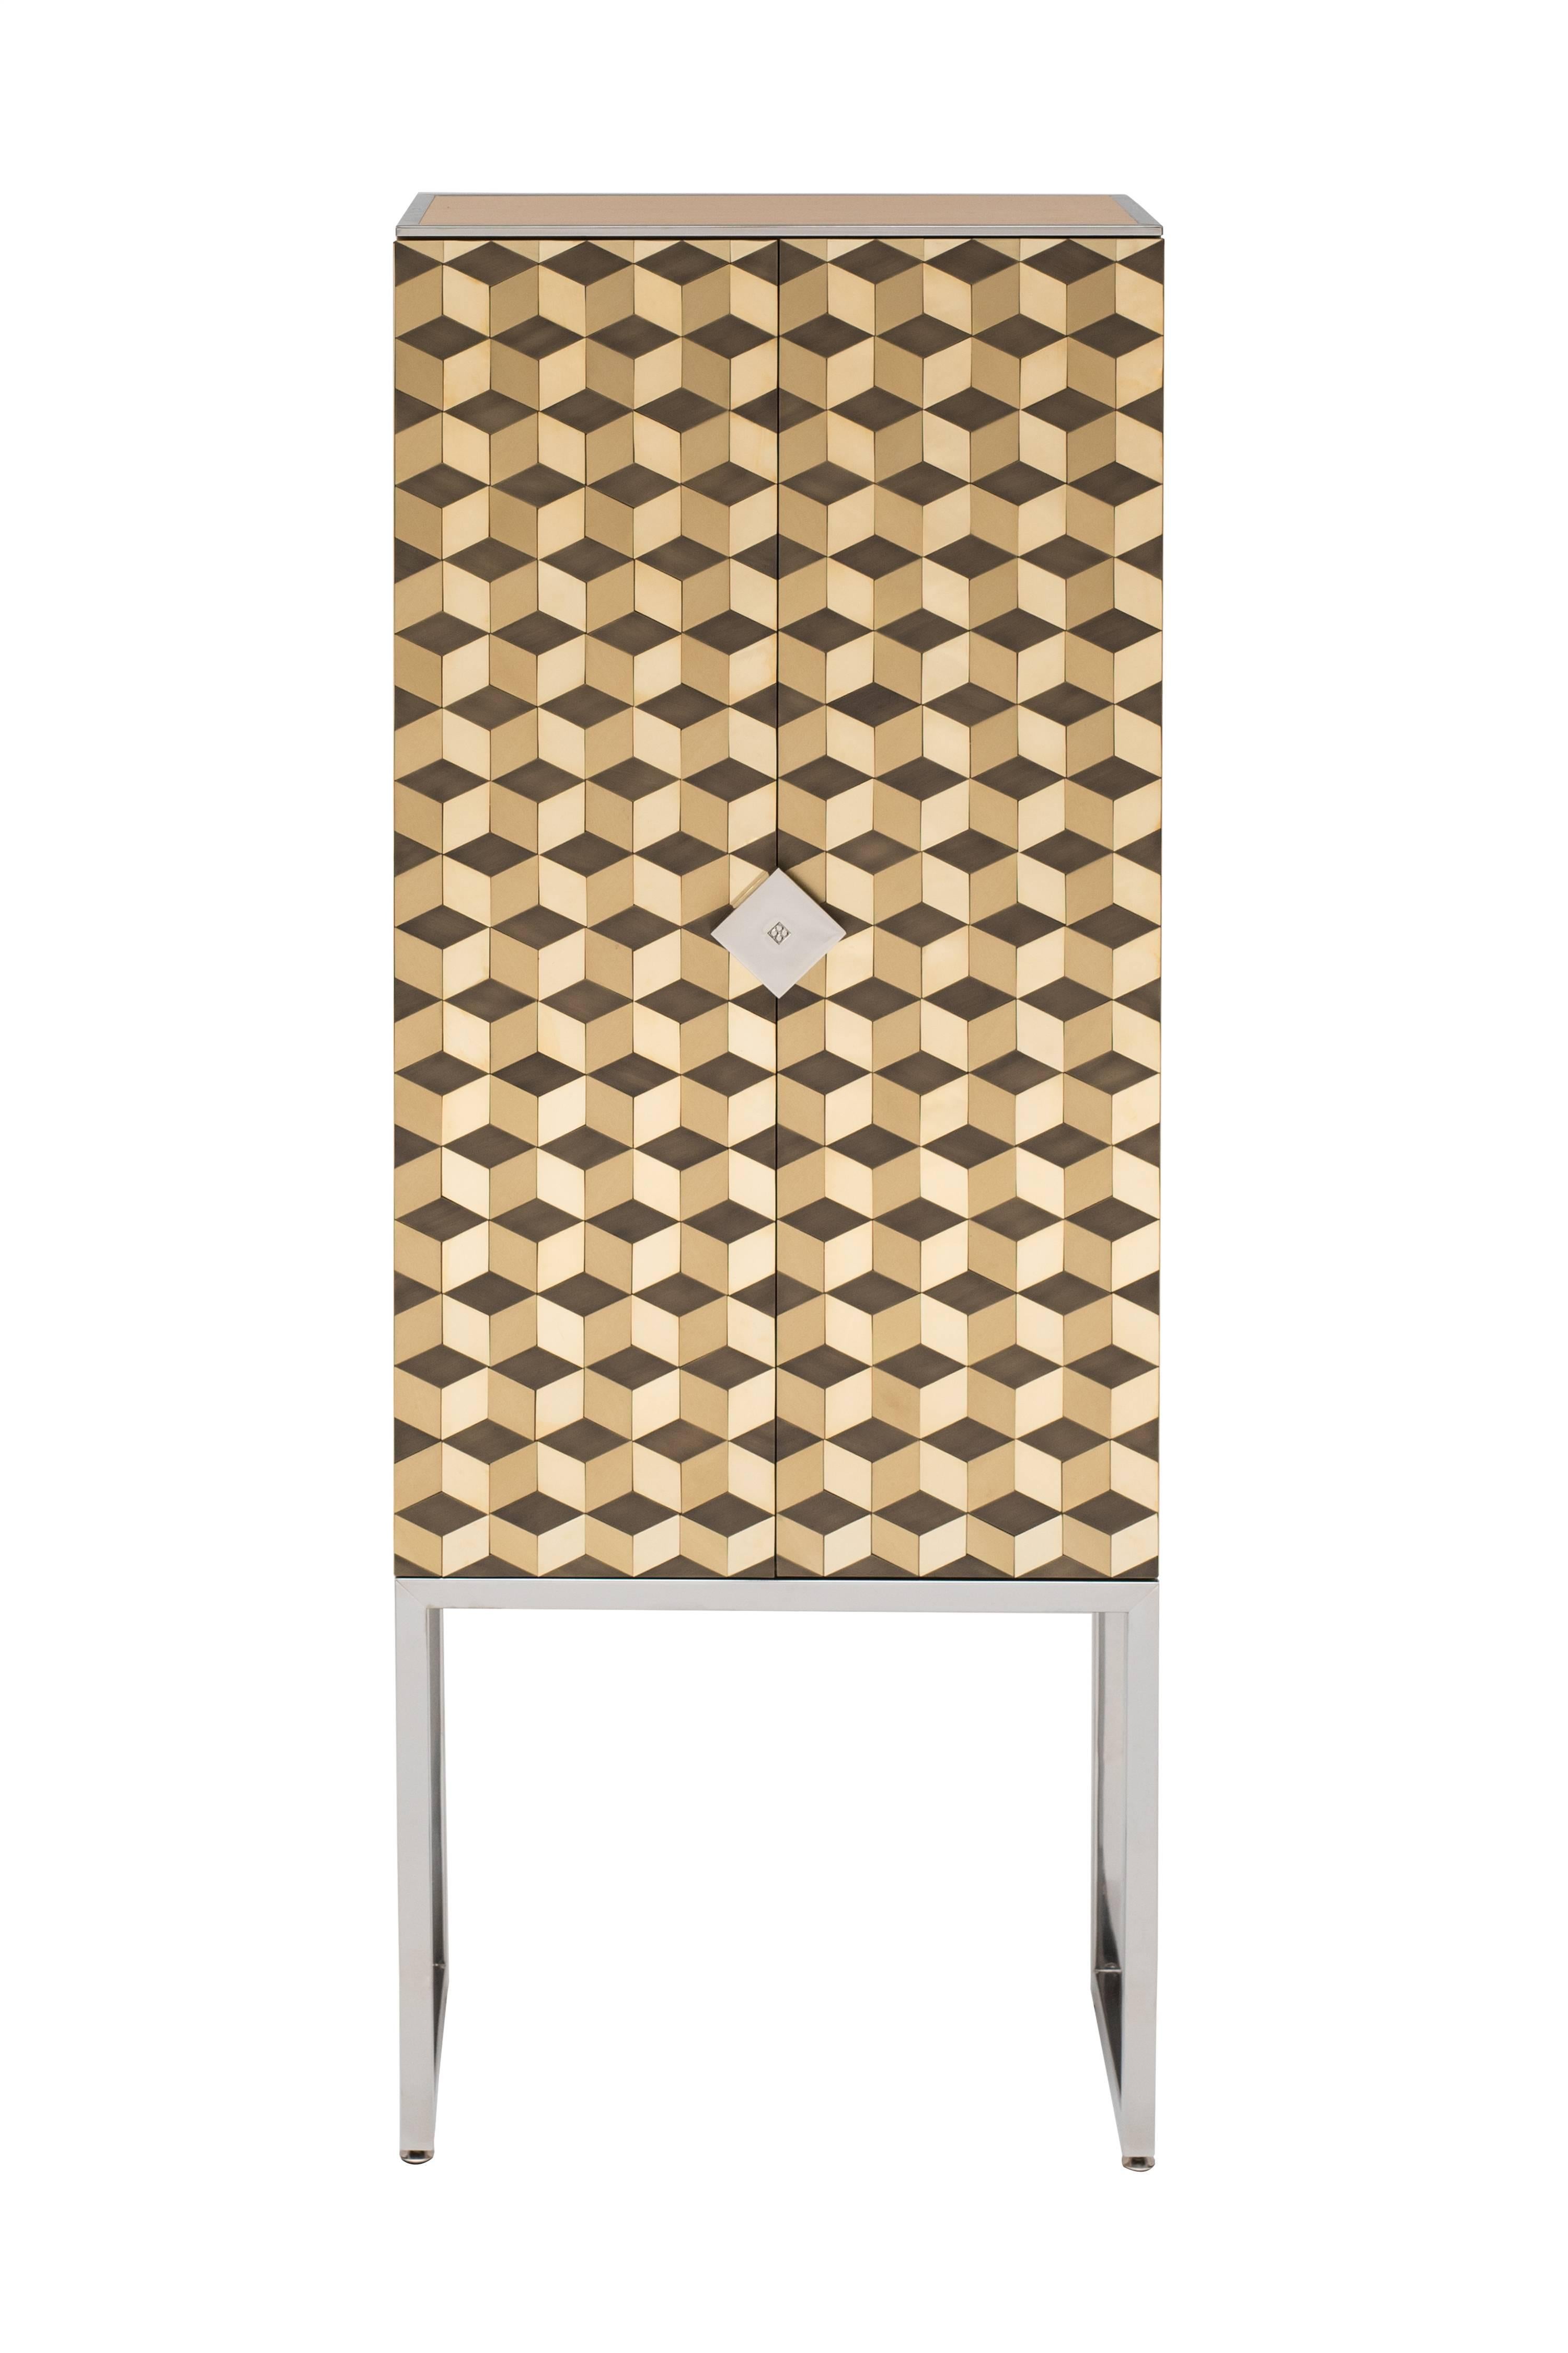 This is a limited edition cabinet by Peter Ghyczy, based on CO3 cabinet. The edition is limited to three pieces. This piece is number one of three.

The front doors are encrusted with 476 tiles in 2 mm brass. Each tile is then polished by hand,